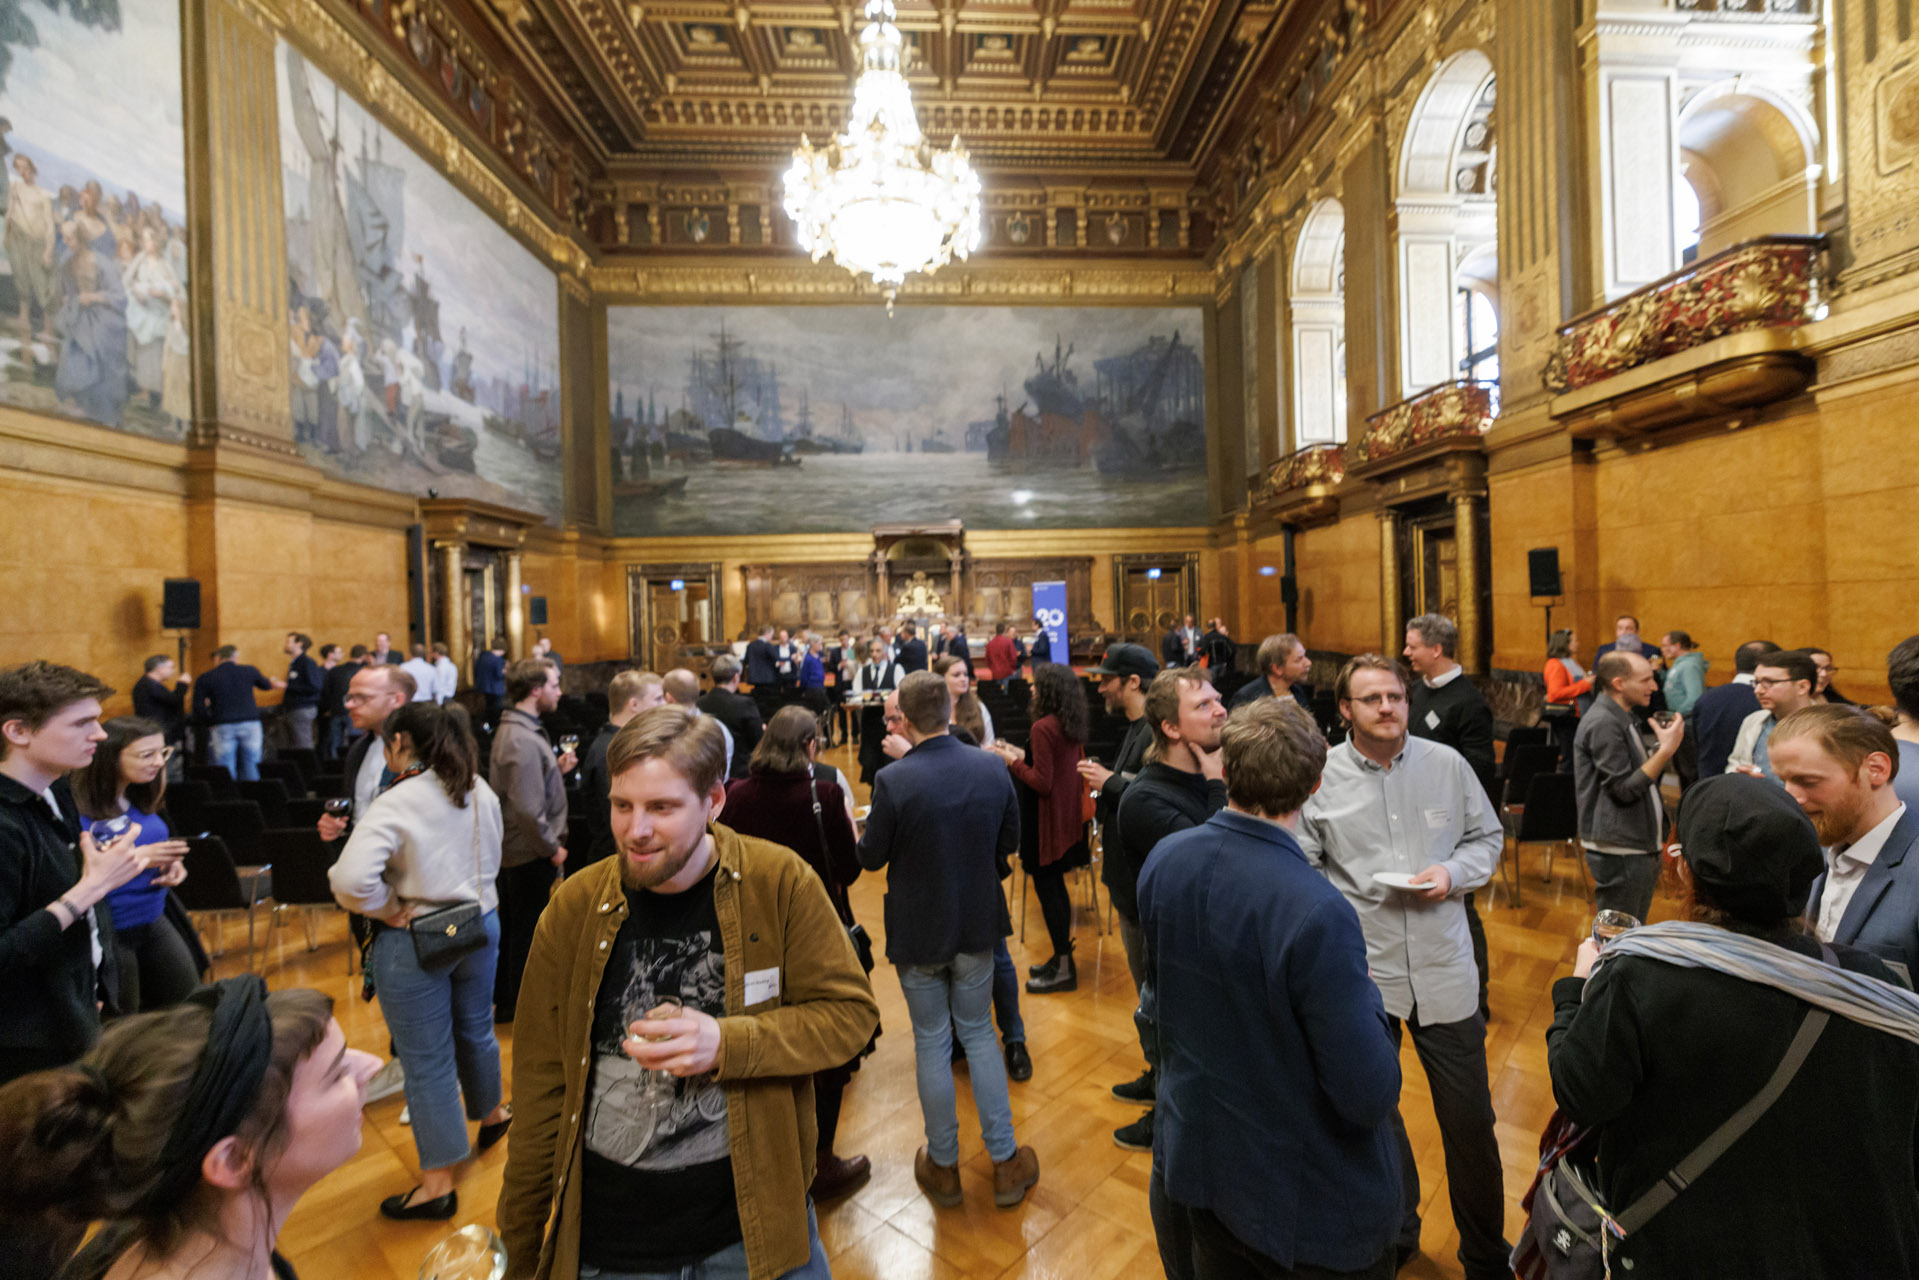 Networking after the speeches and panel discussion at Hamburg City Hall / Photo by Marcelo Hernandez